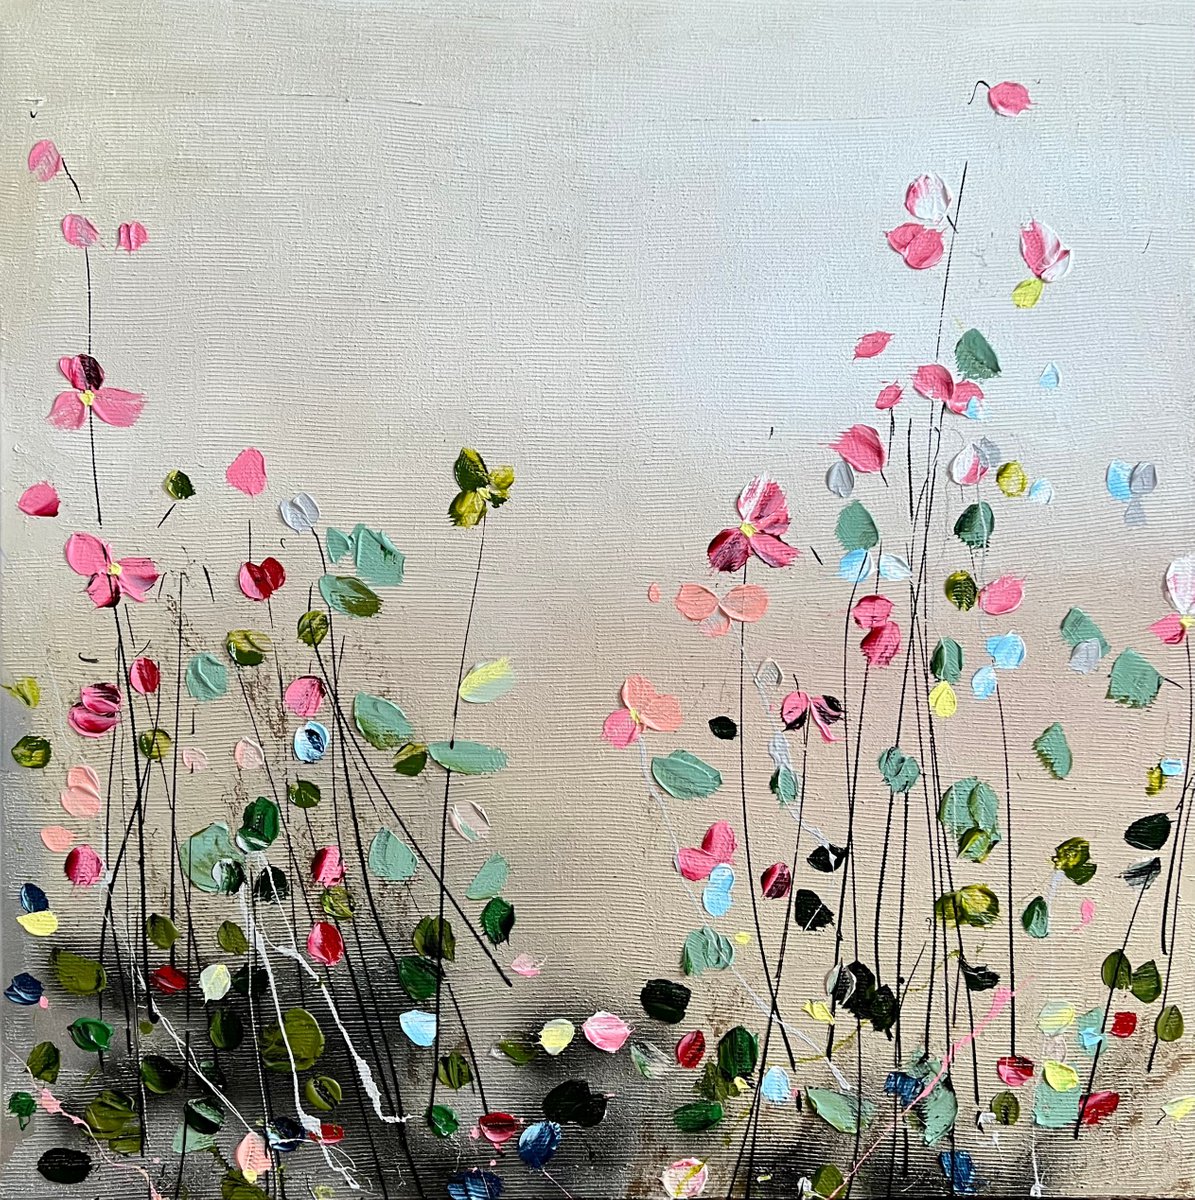 Square acrylic painting with flowers -Flowers In The Morning-? 90x90cm by Anastassia Skopp